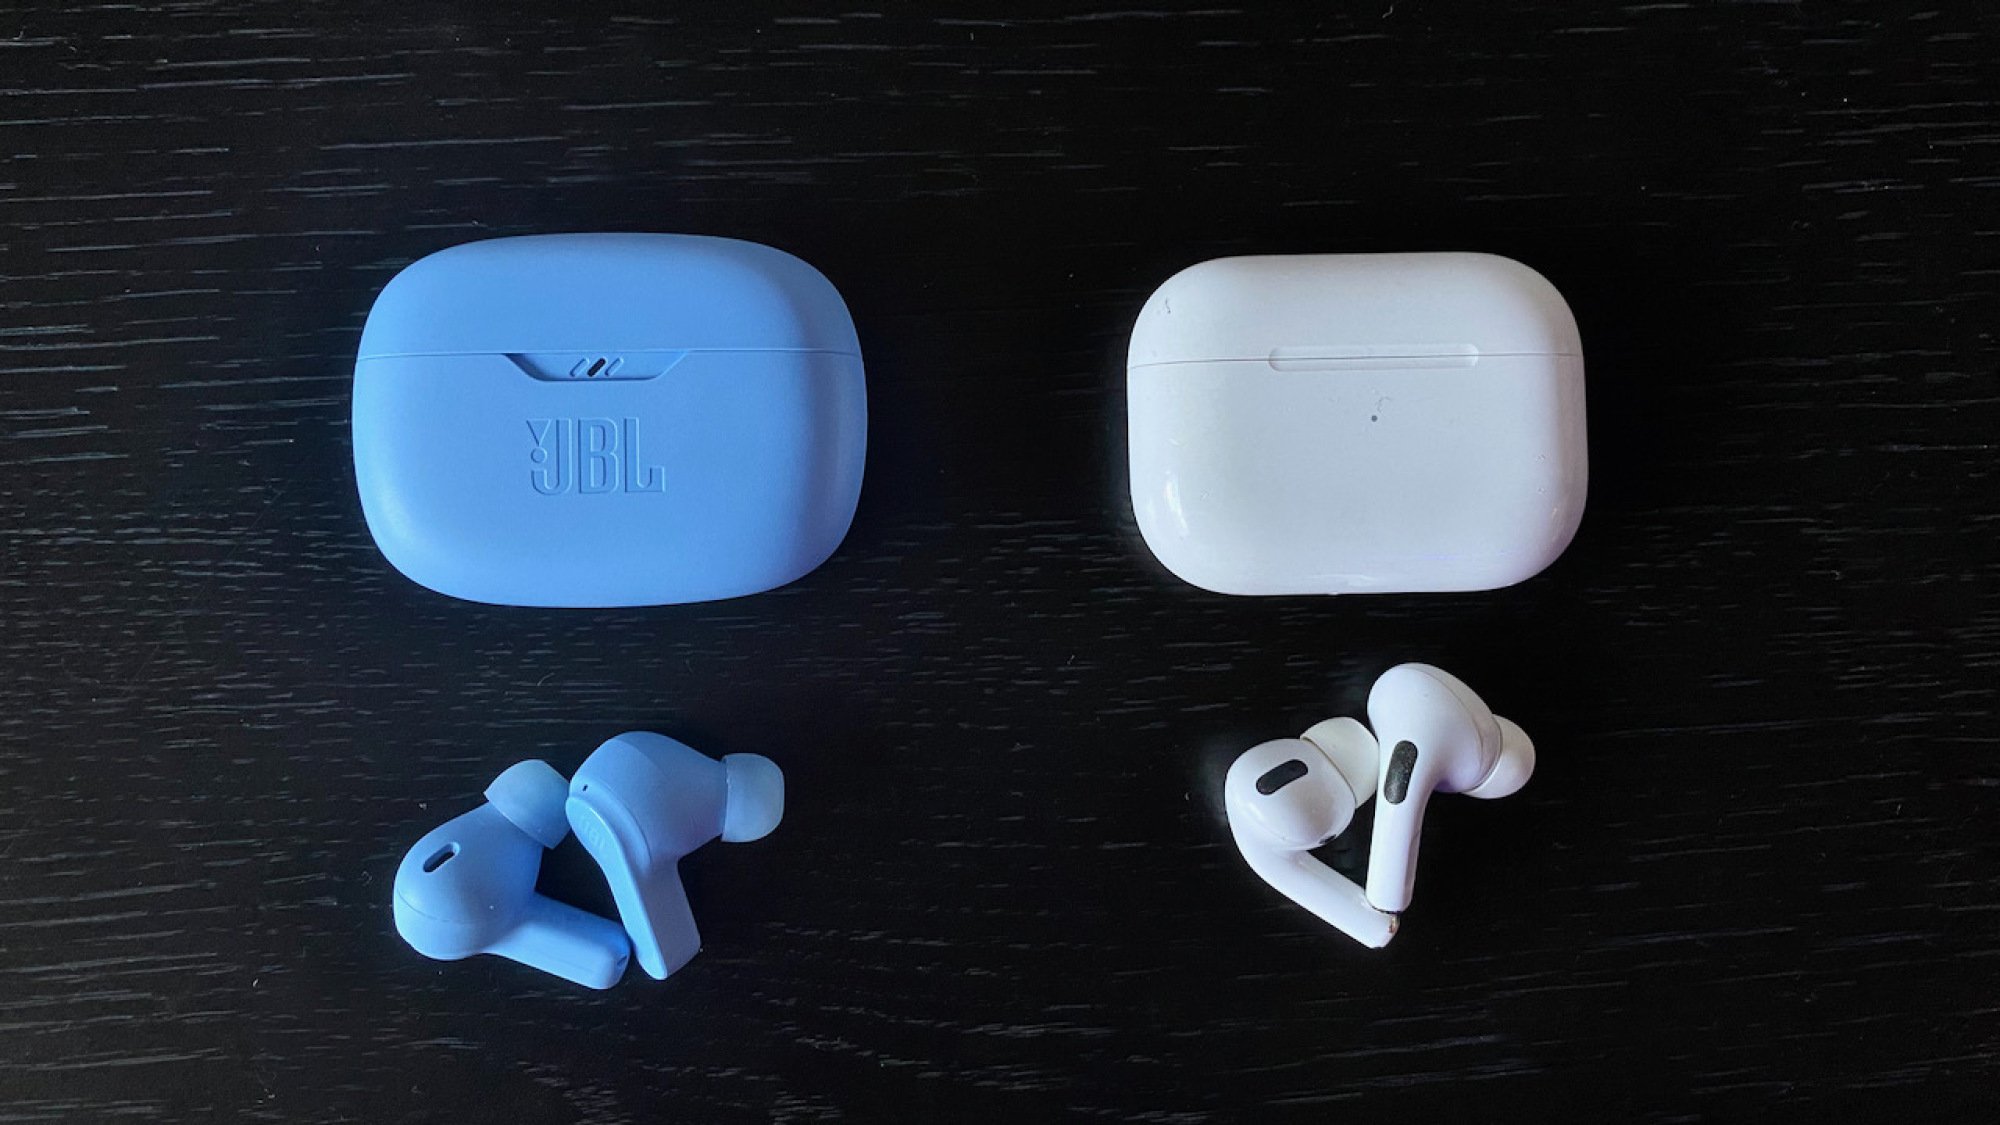 JBL vibe beam earbuds next to Apple AirPods Pro